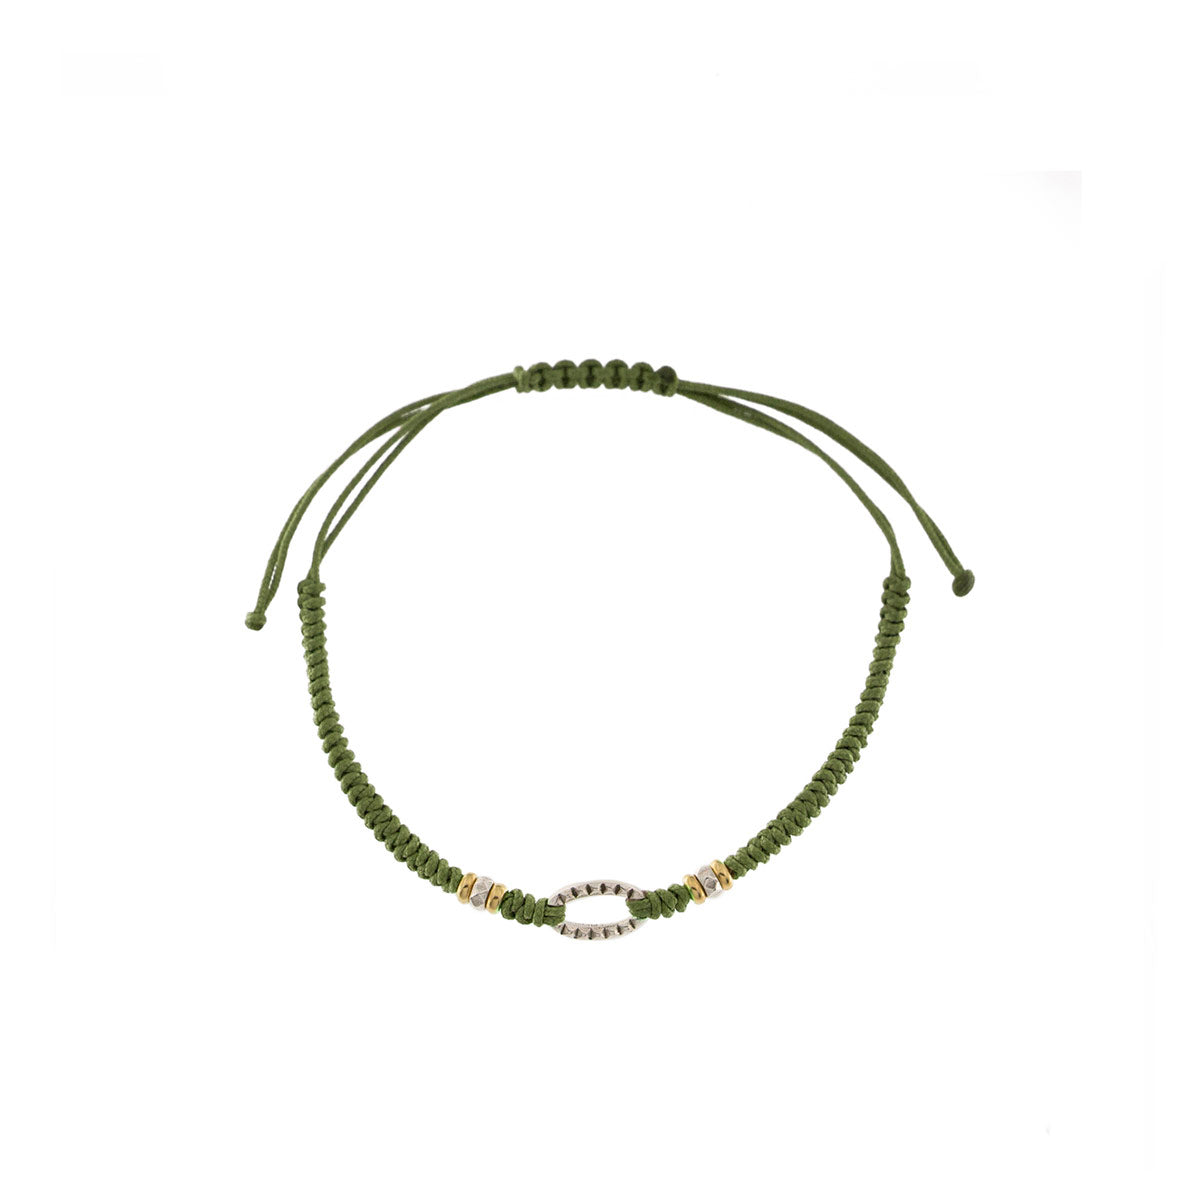 Bracelets - Round woven bracelet with and oval with studs - TANGLE - 2 | Rue des Mille